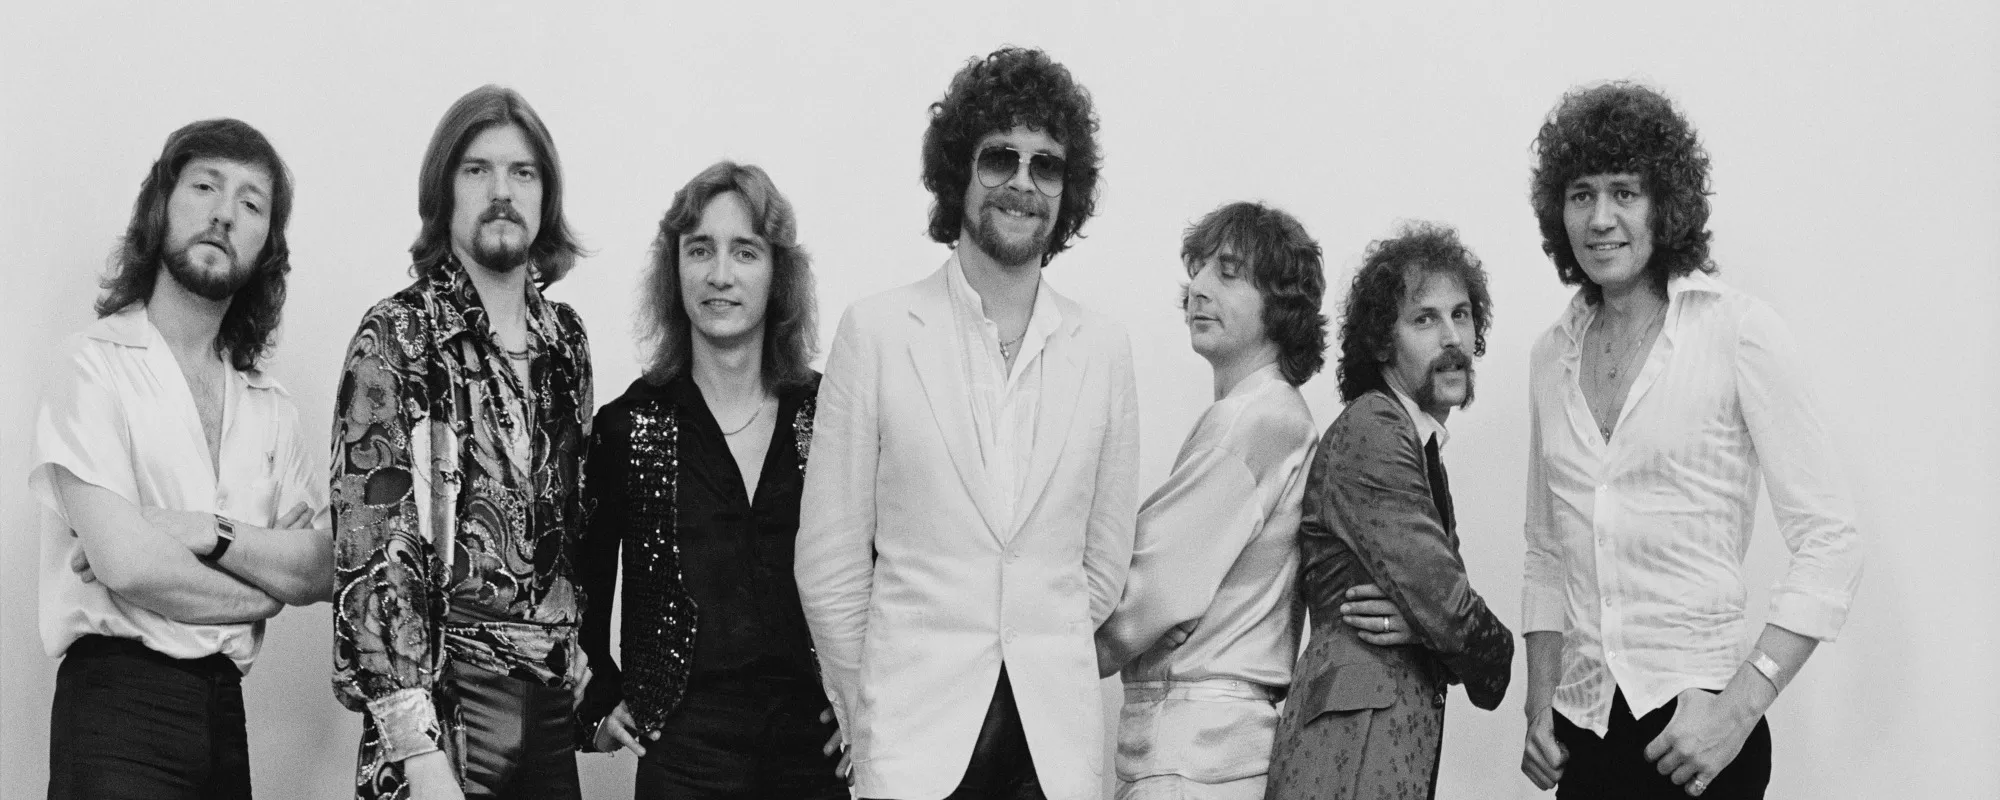 Behind the Symphonic-Rock Band Name Electric Light Orchestra